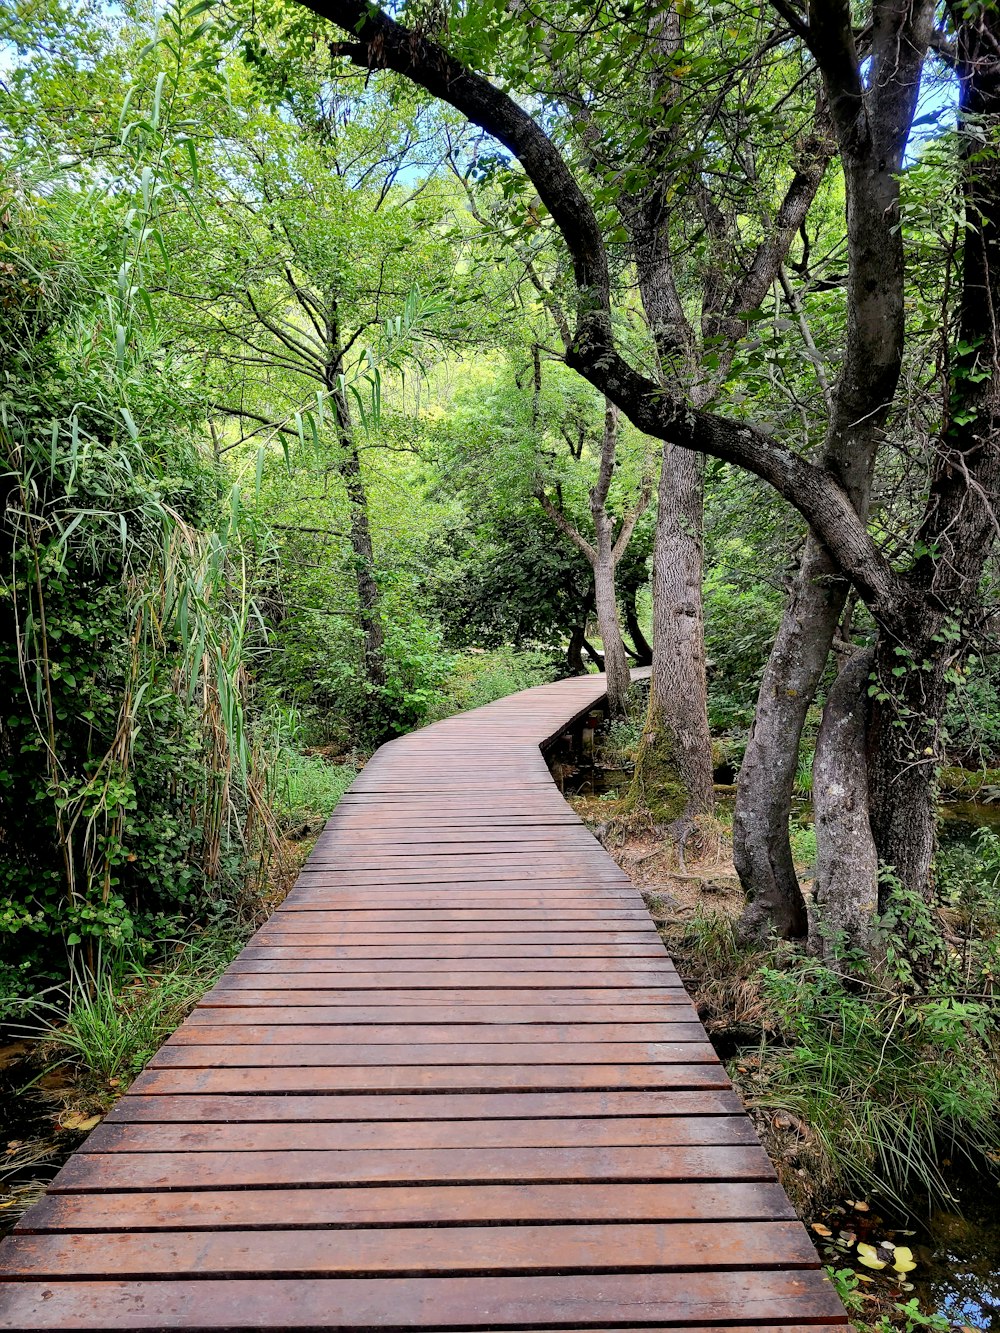 a wooden walkway through a forest with lots of trees